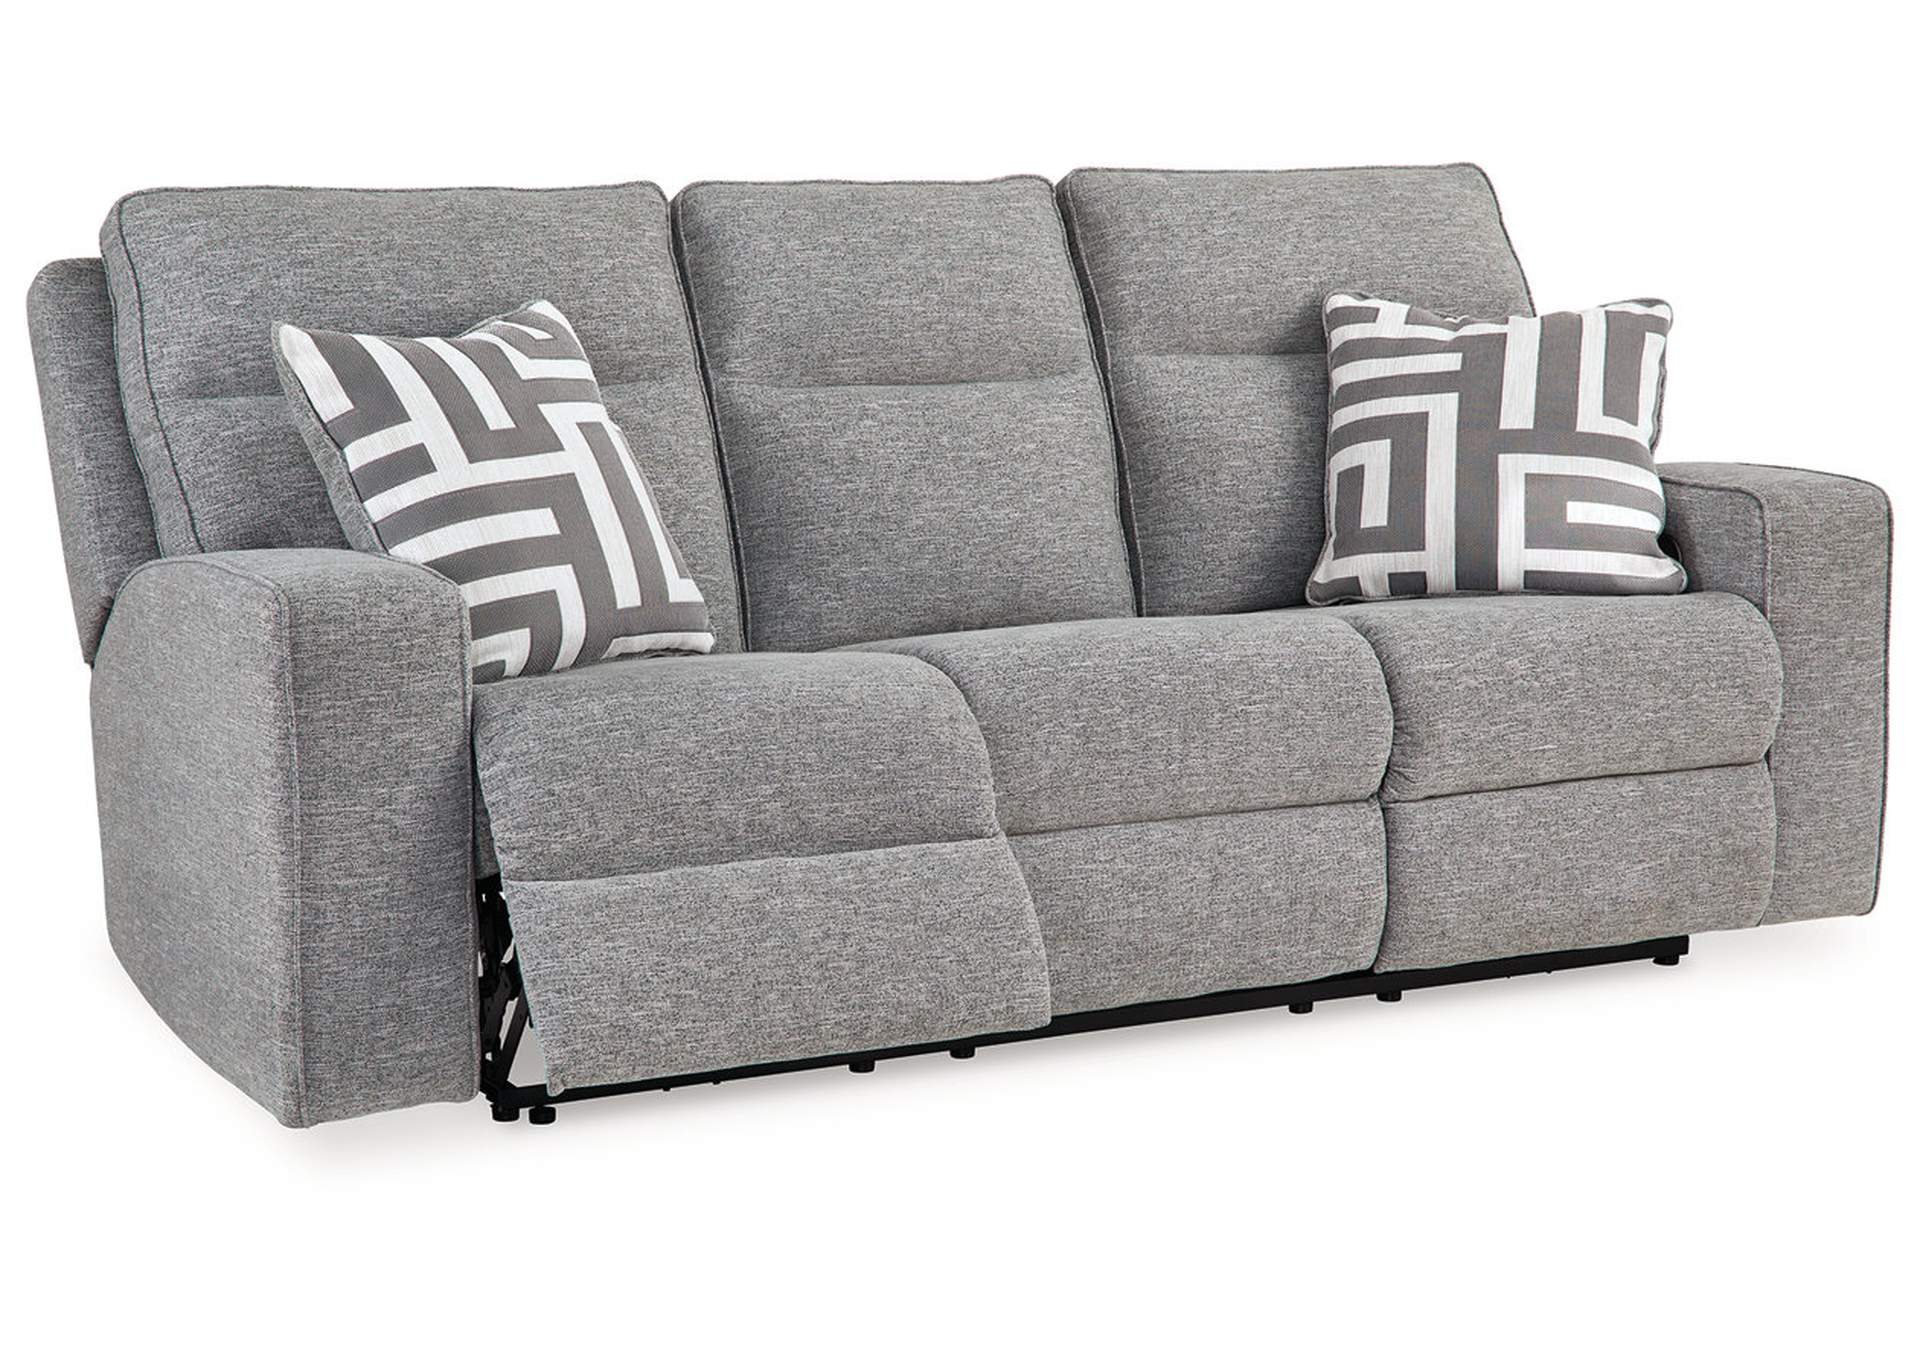 Biscoe Power Reclining Sofa,Signature Design By Ashley